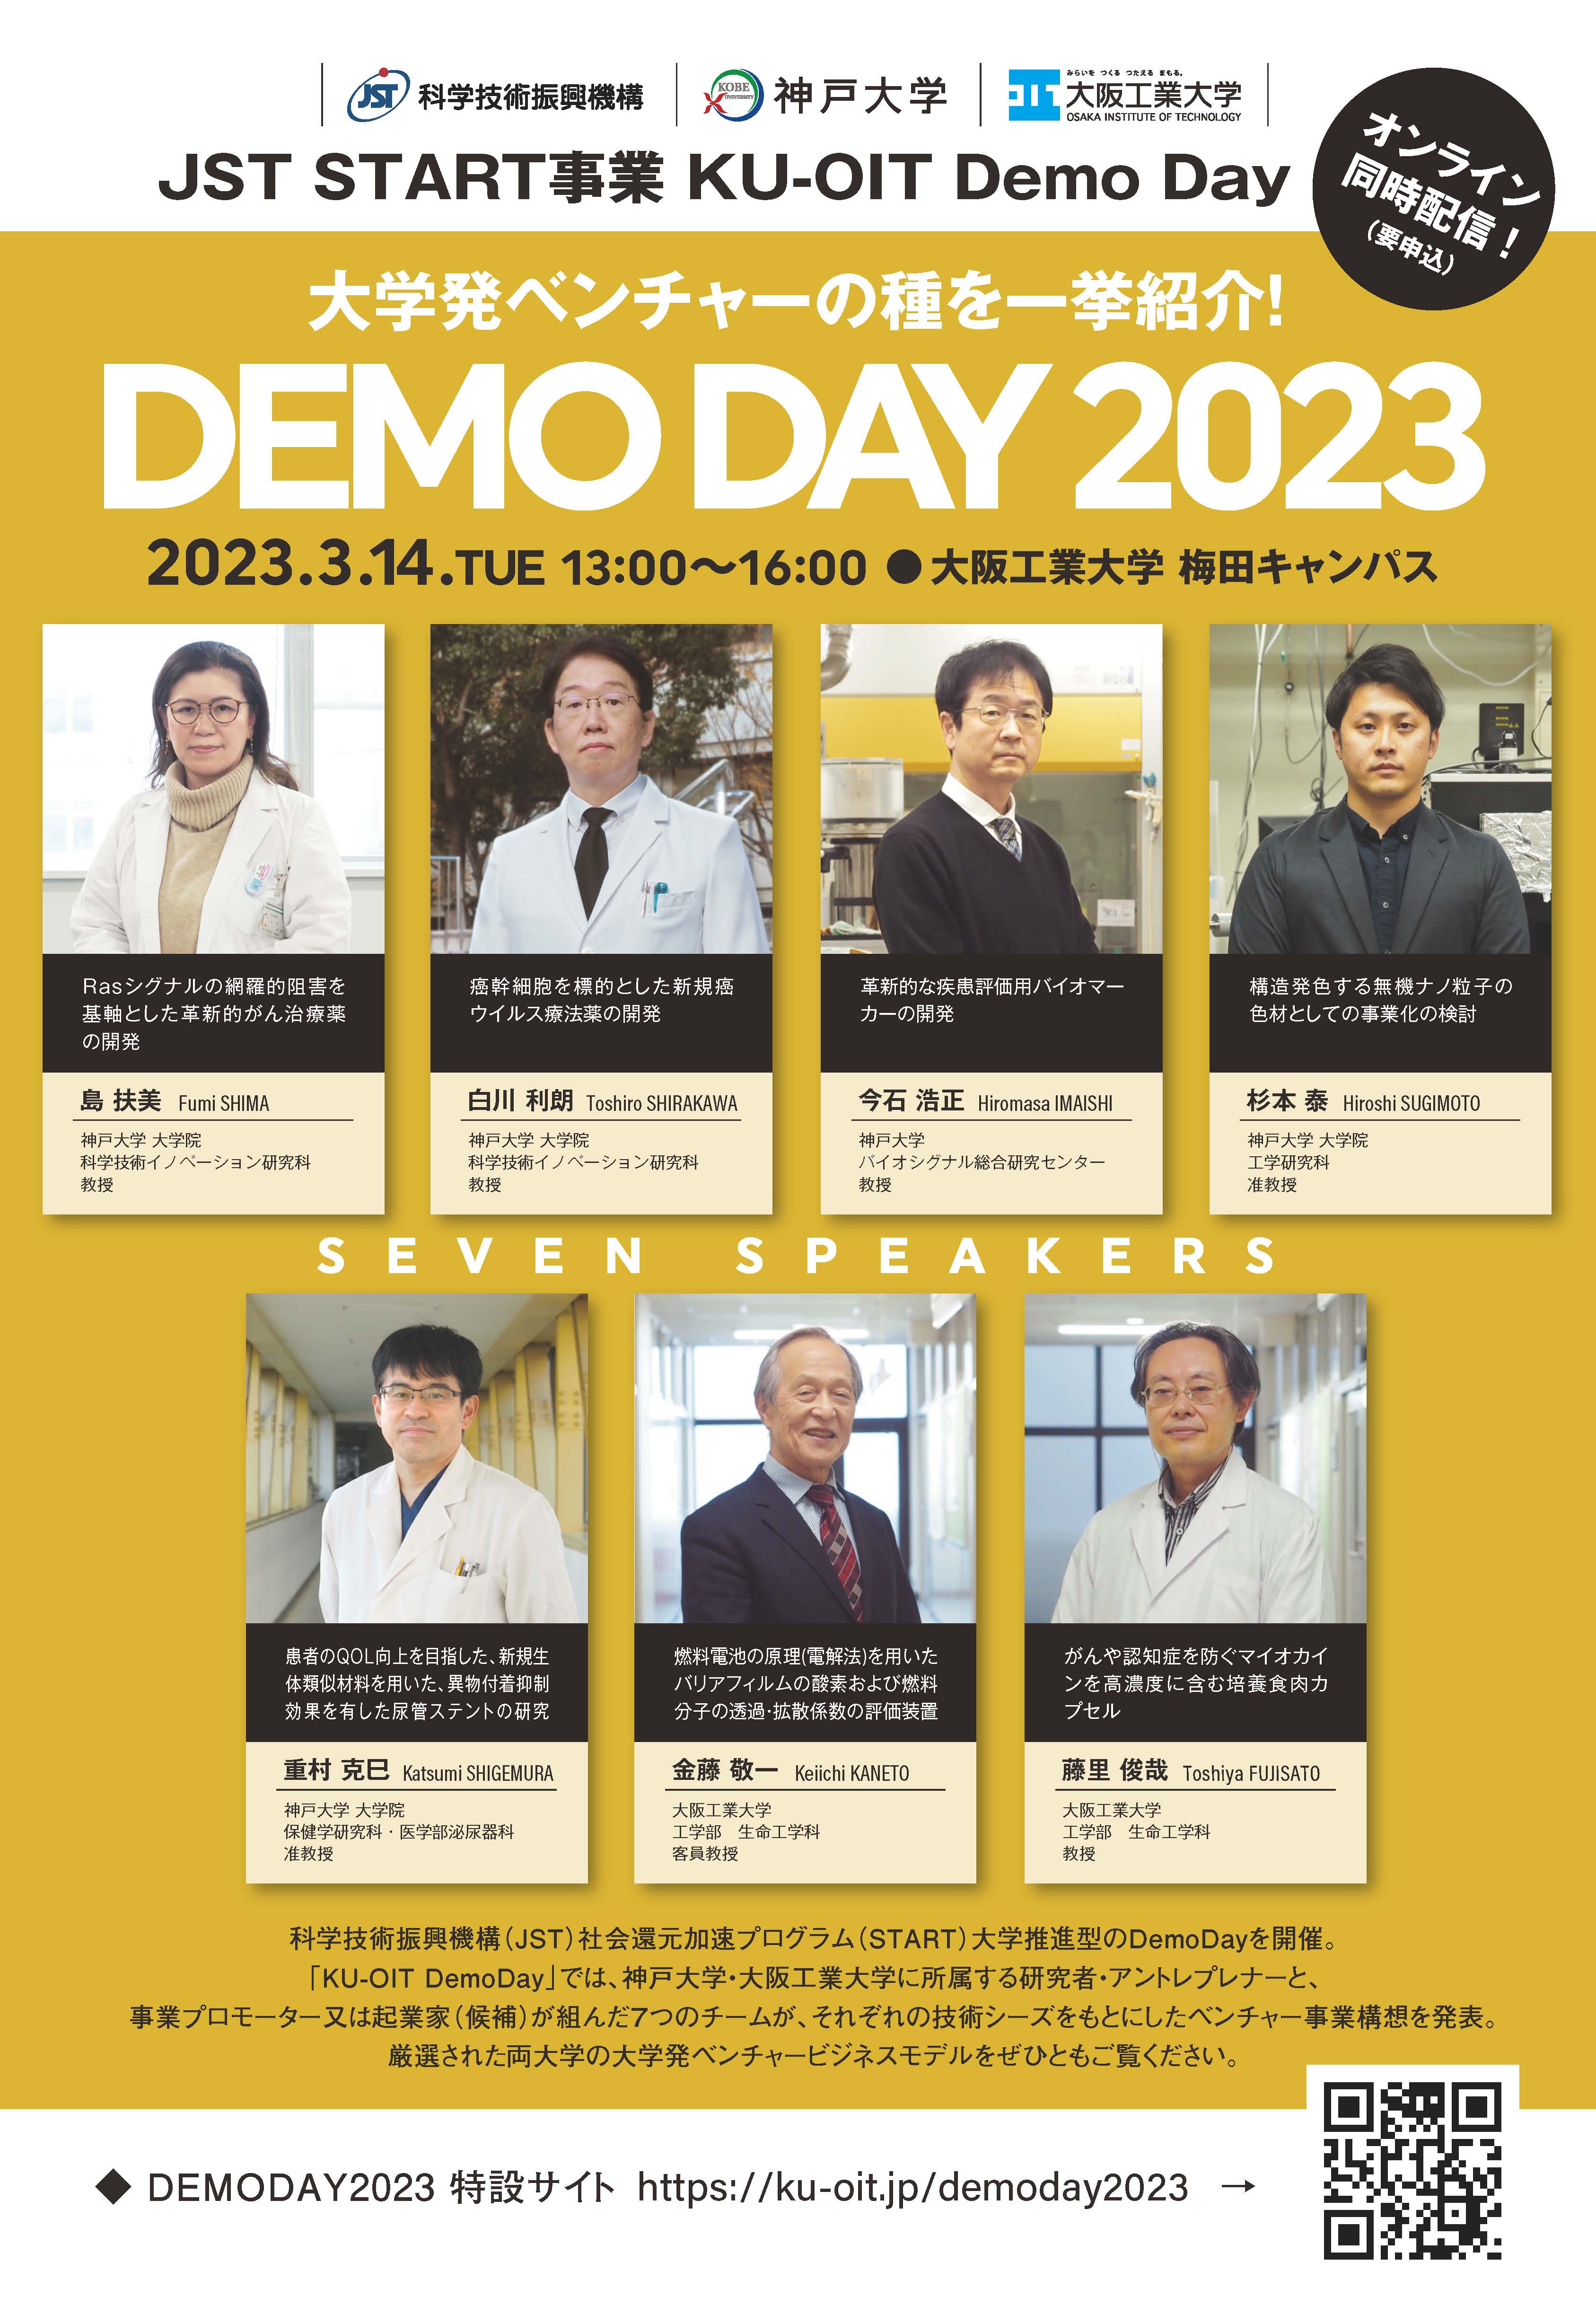 DEMO DAY 2023